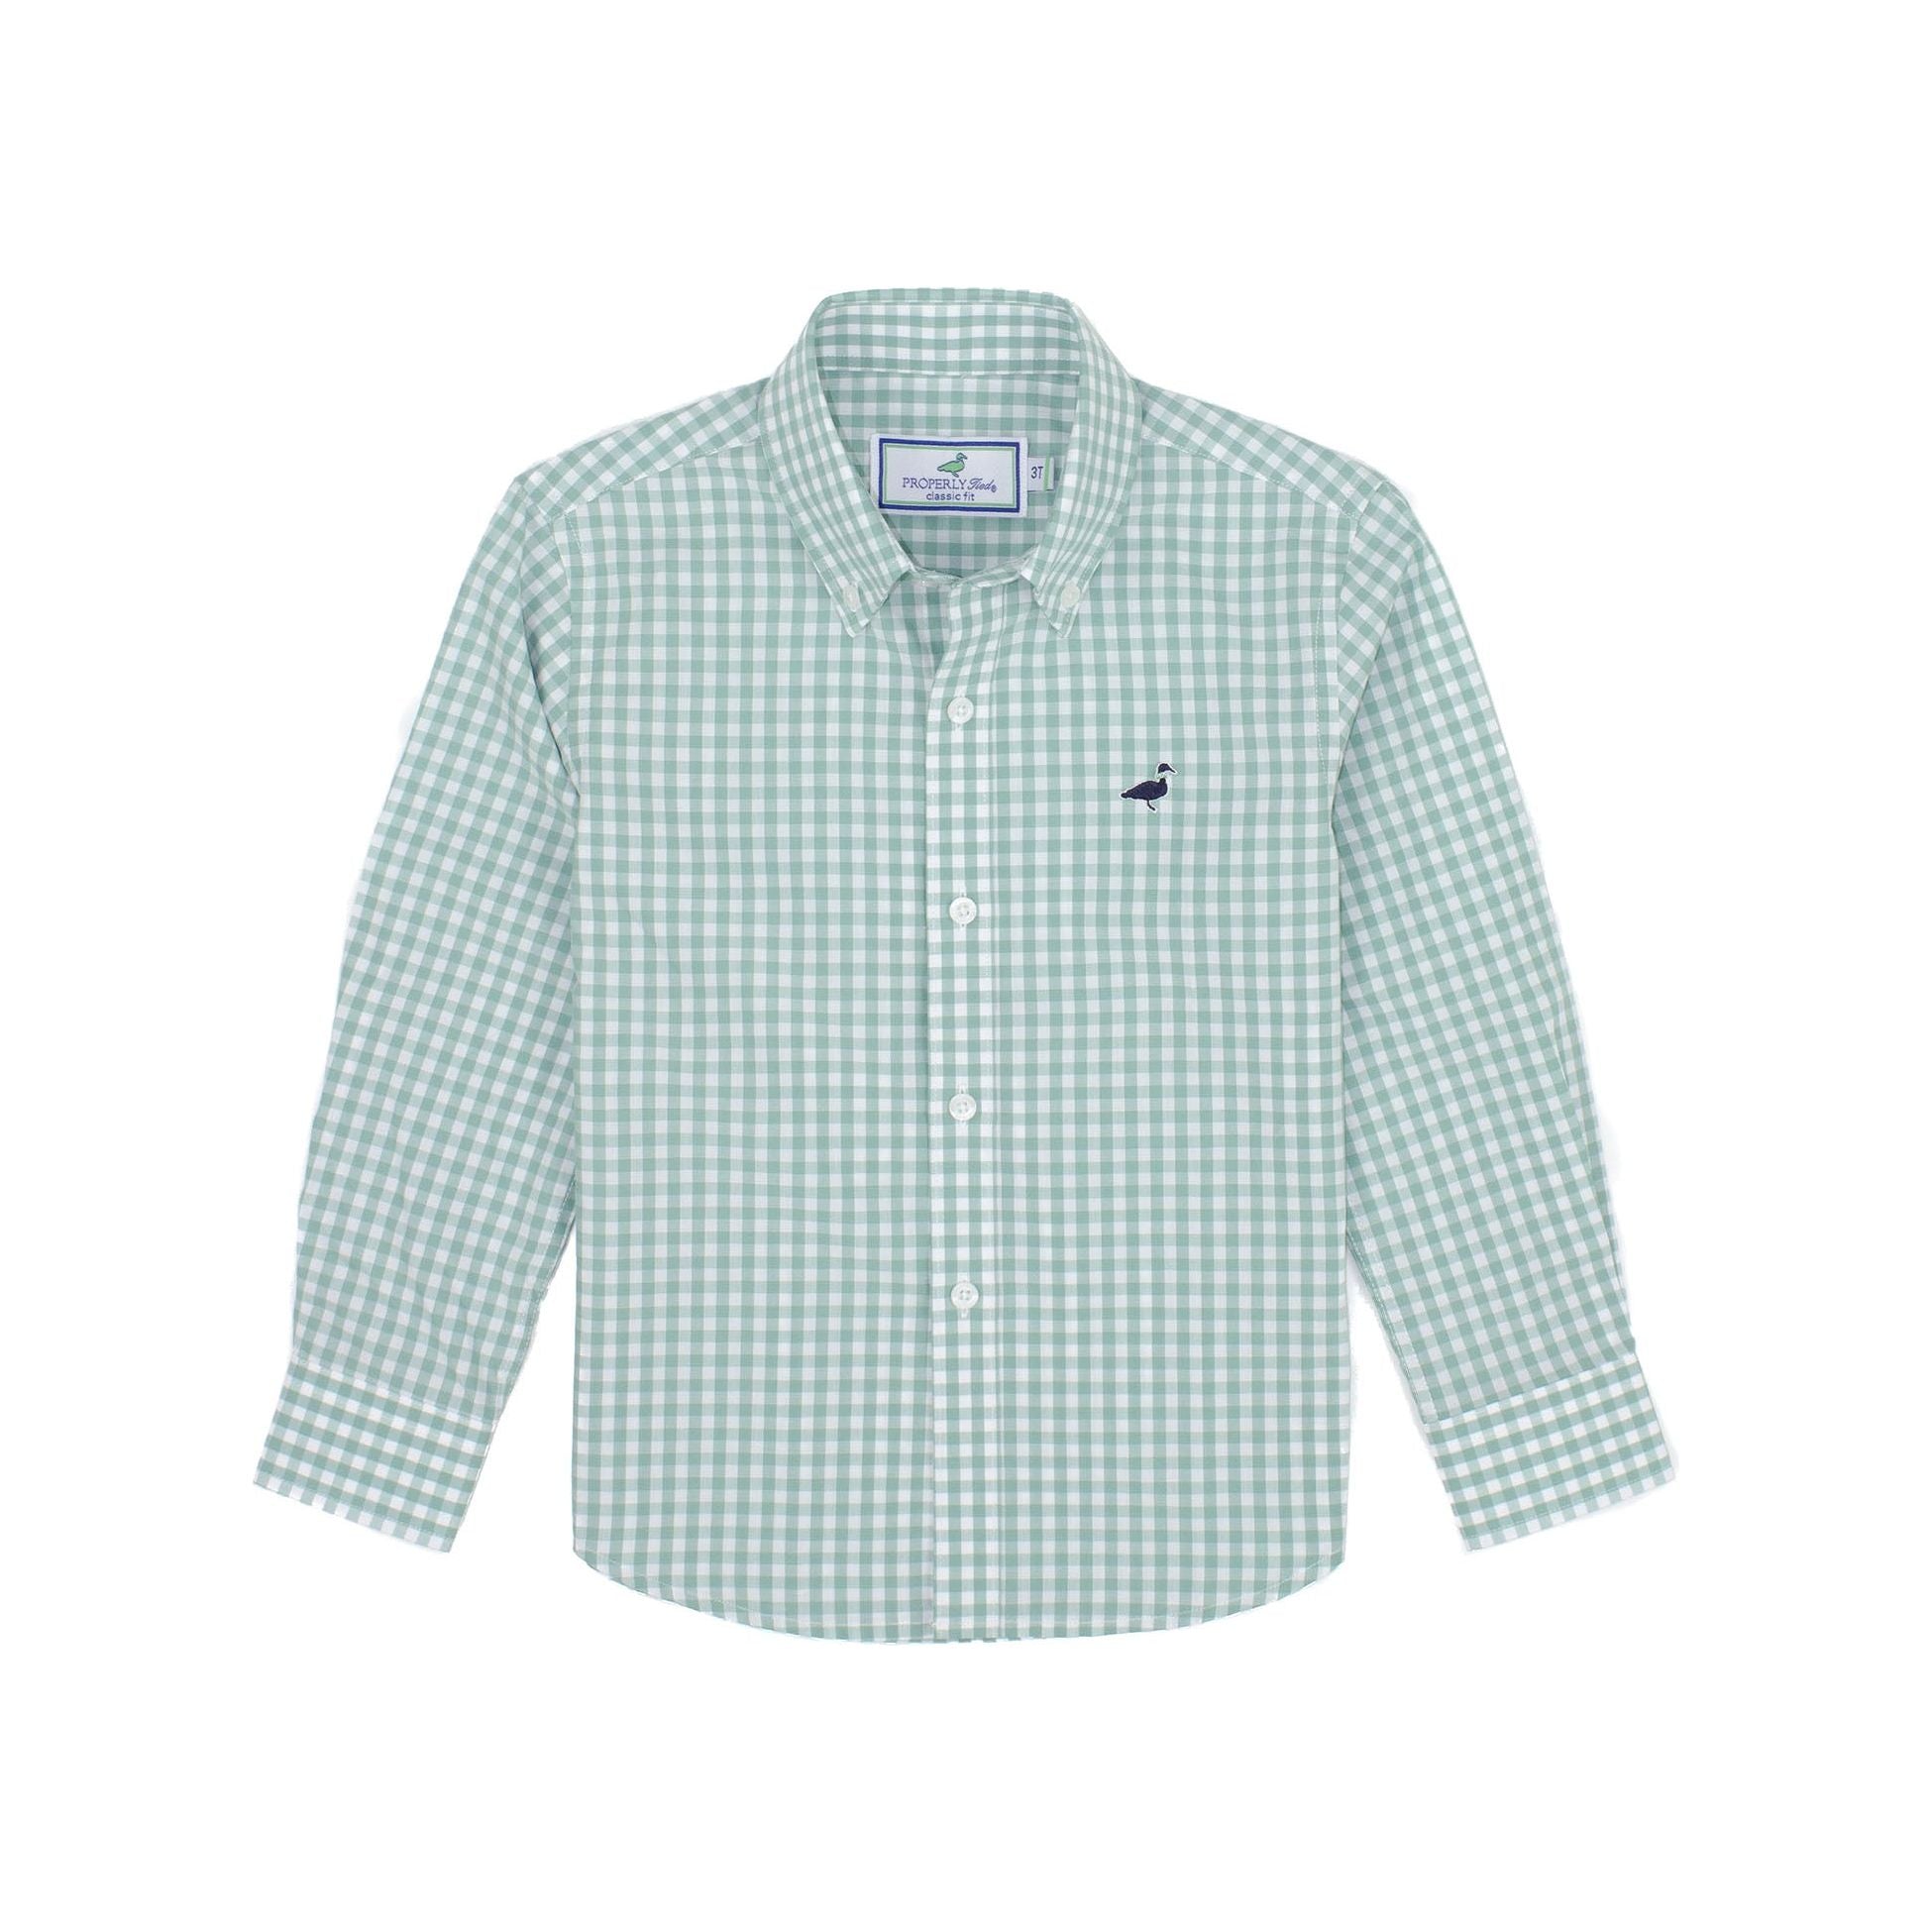 green and white plaid button up sportshirt with blue mallard logo on left chest 